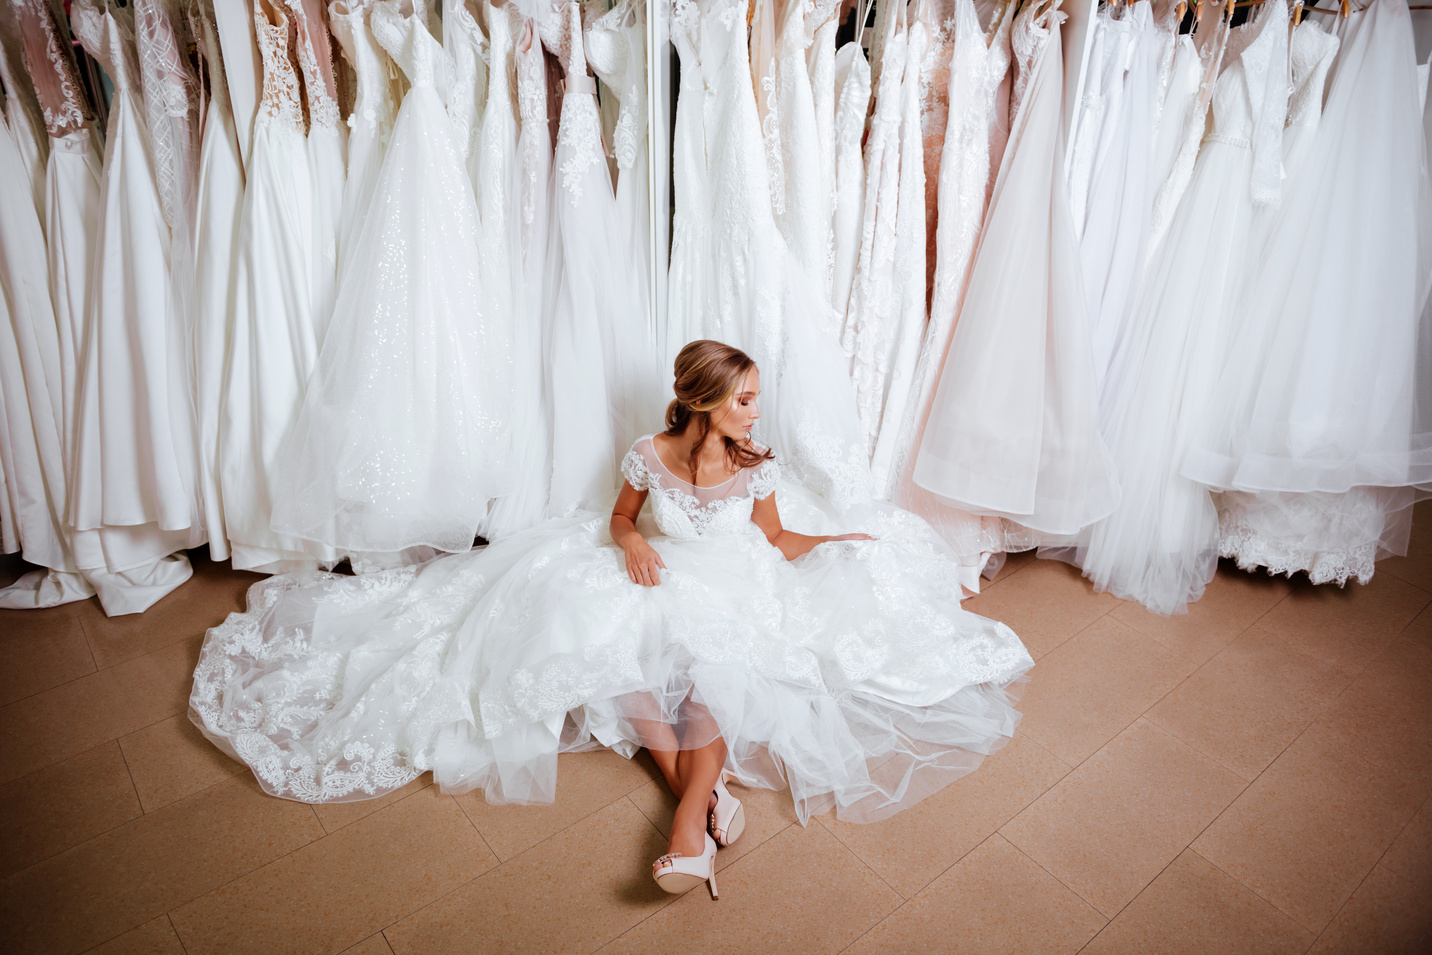 Attractive young bride is smiling while choosing wedding dress